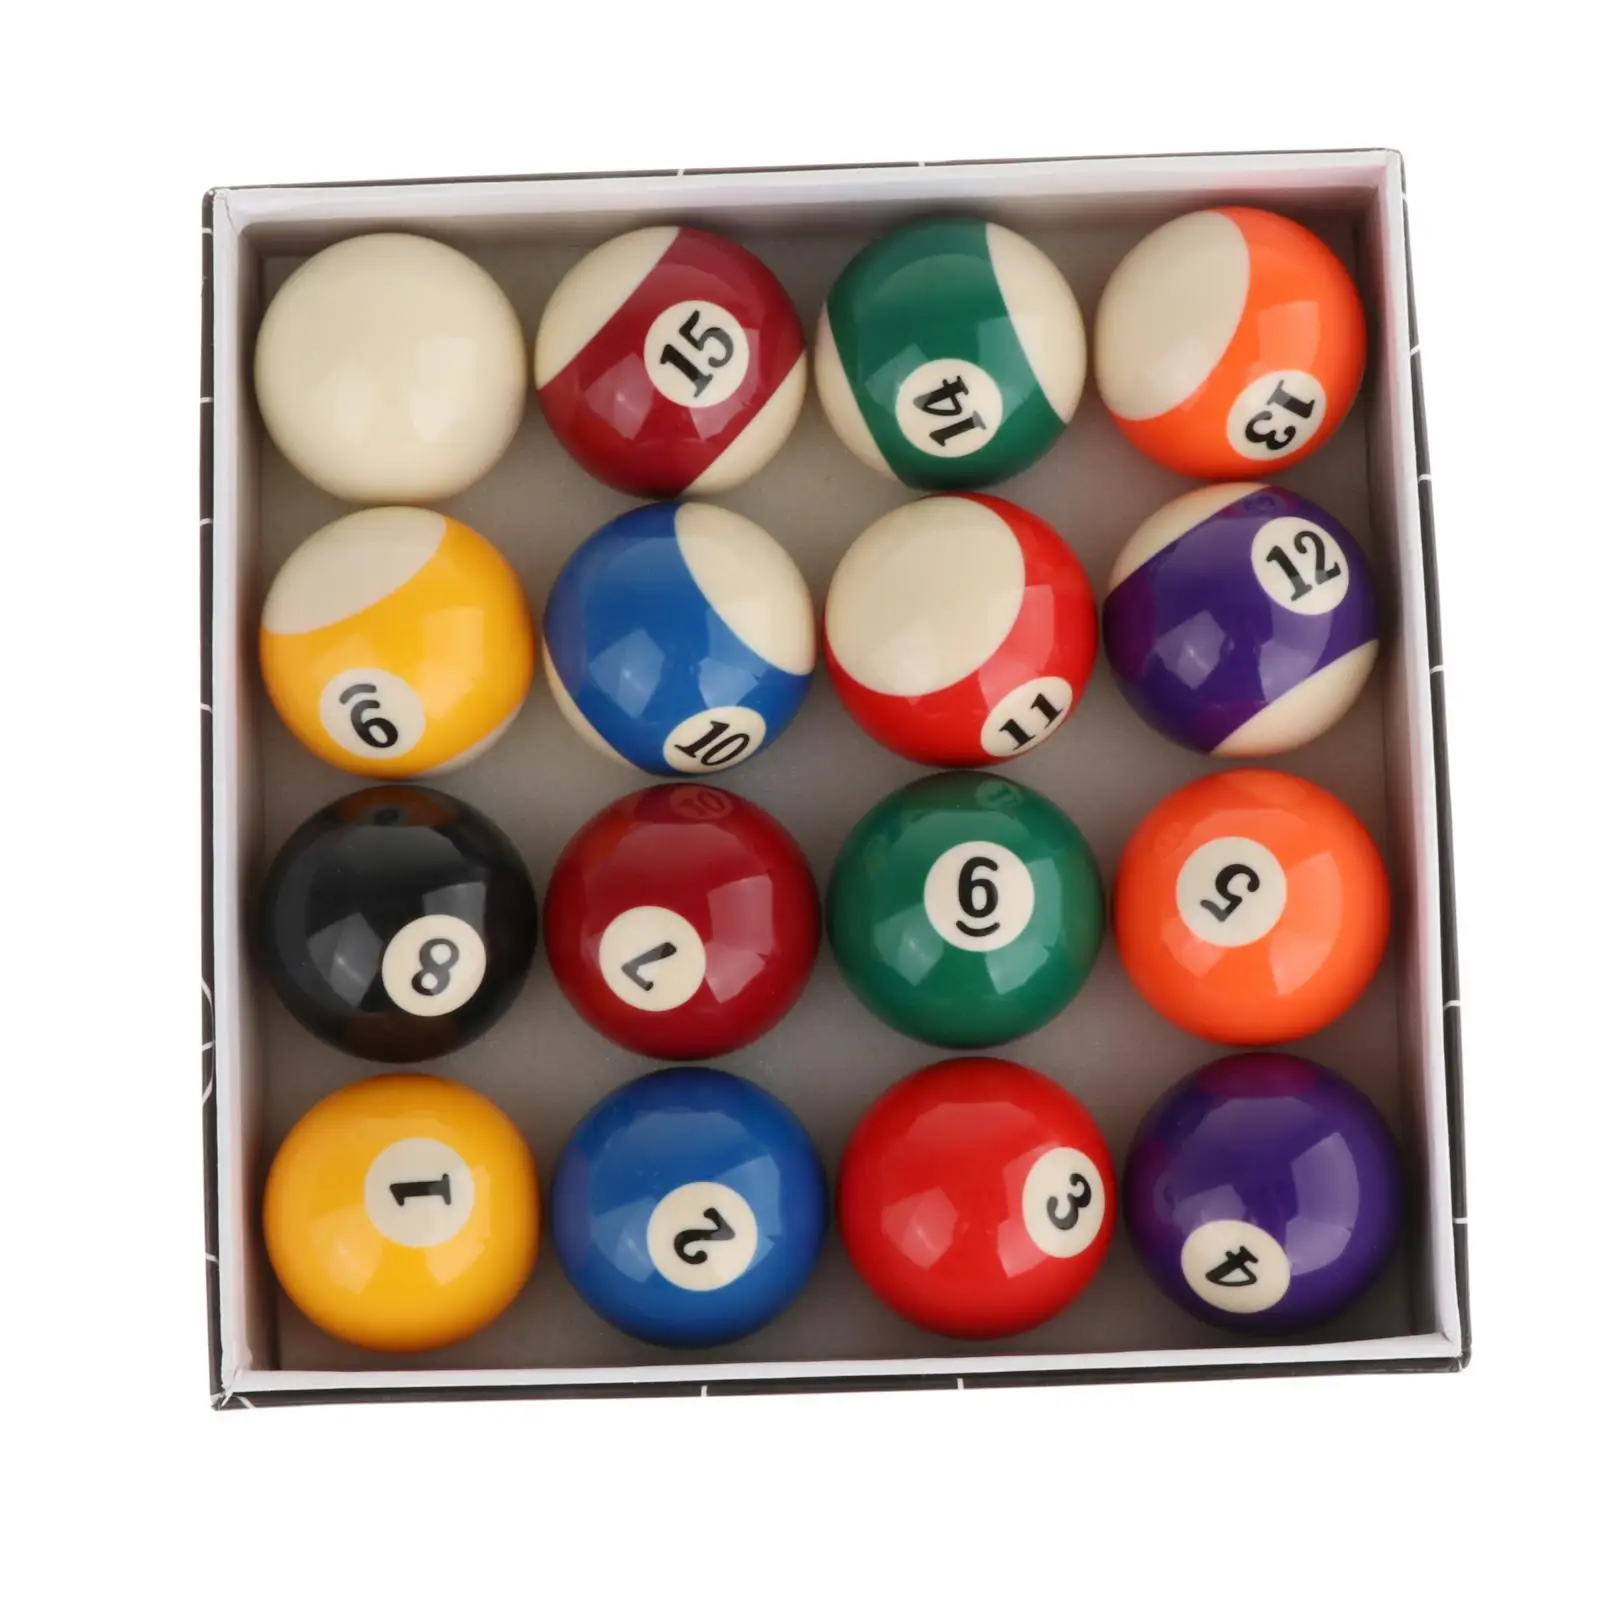 16 Pieces Resin Billiard Balls Pool Cue Balls Full Set for Leisure Time Bars